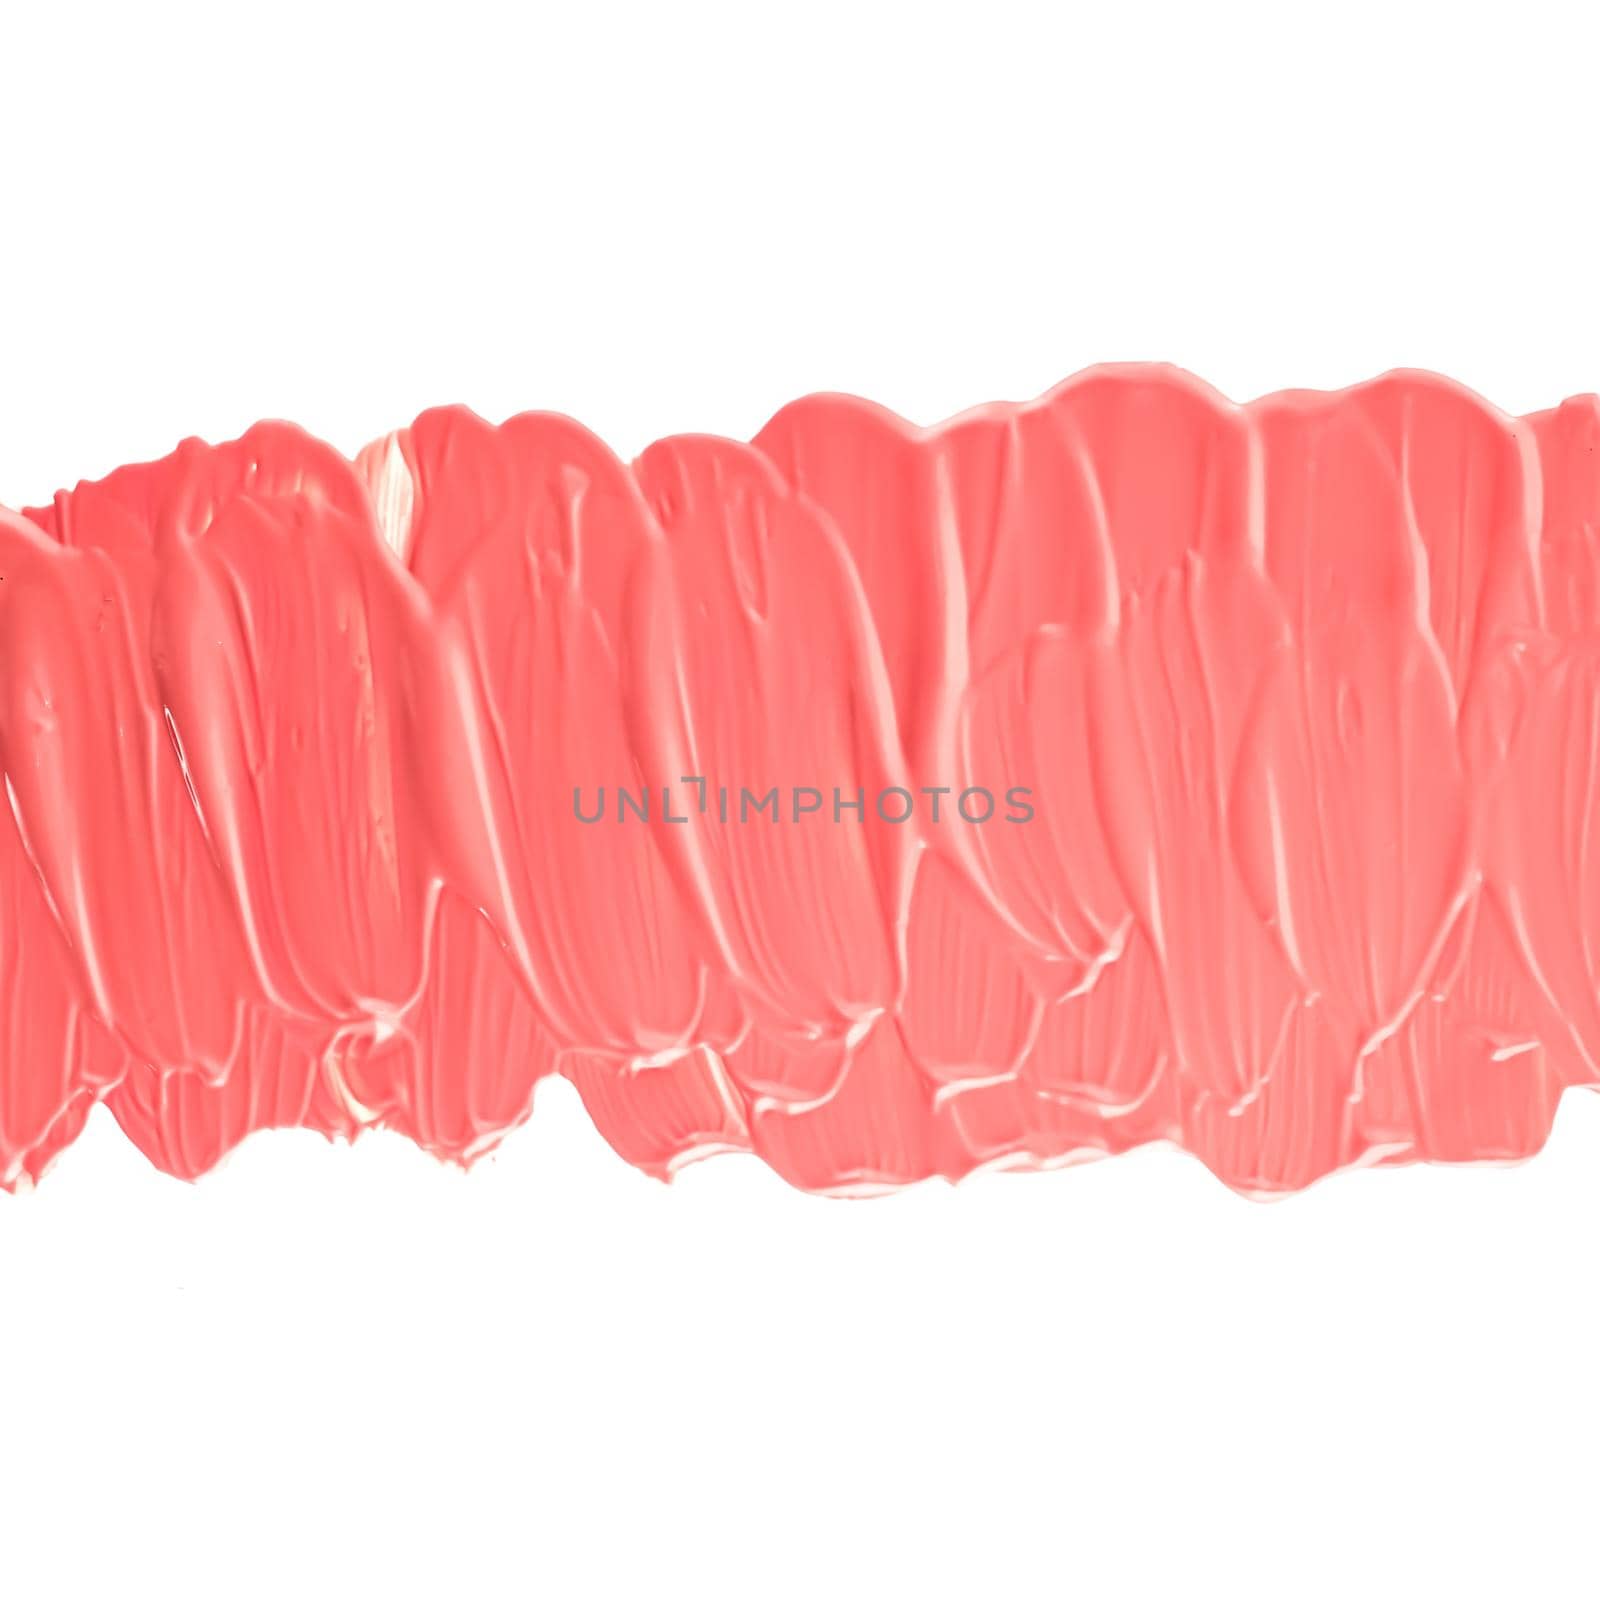 Pastel coral beauty swatch, skincare and makeup cosmetic product sample texture isolated on white background, make-up smudge, cream cosmetics smear or paint brush stroke by Anneleven